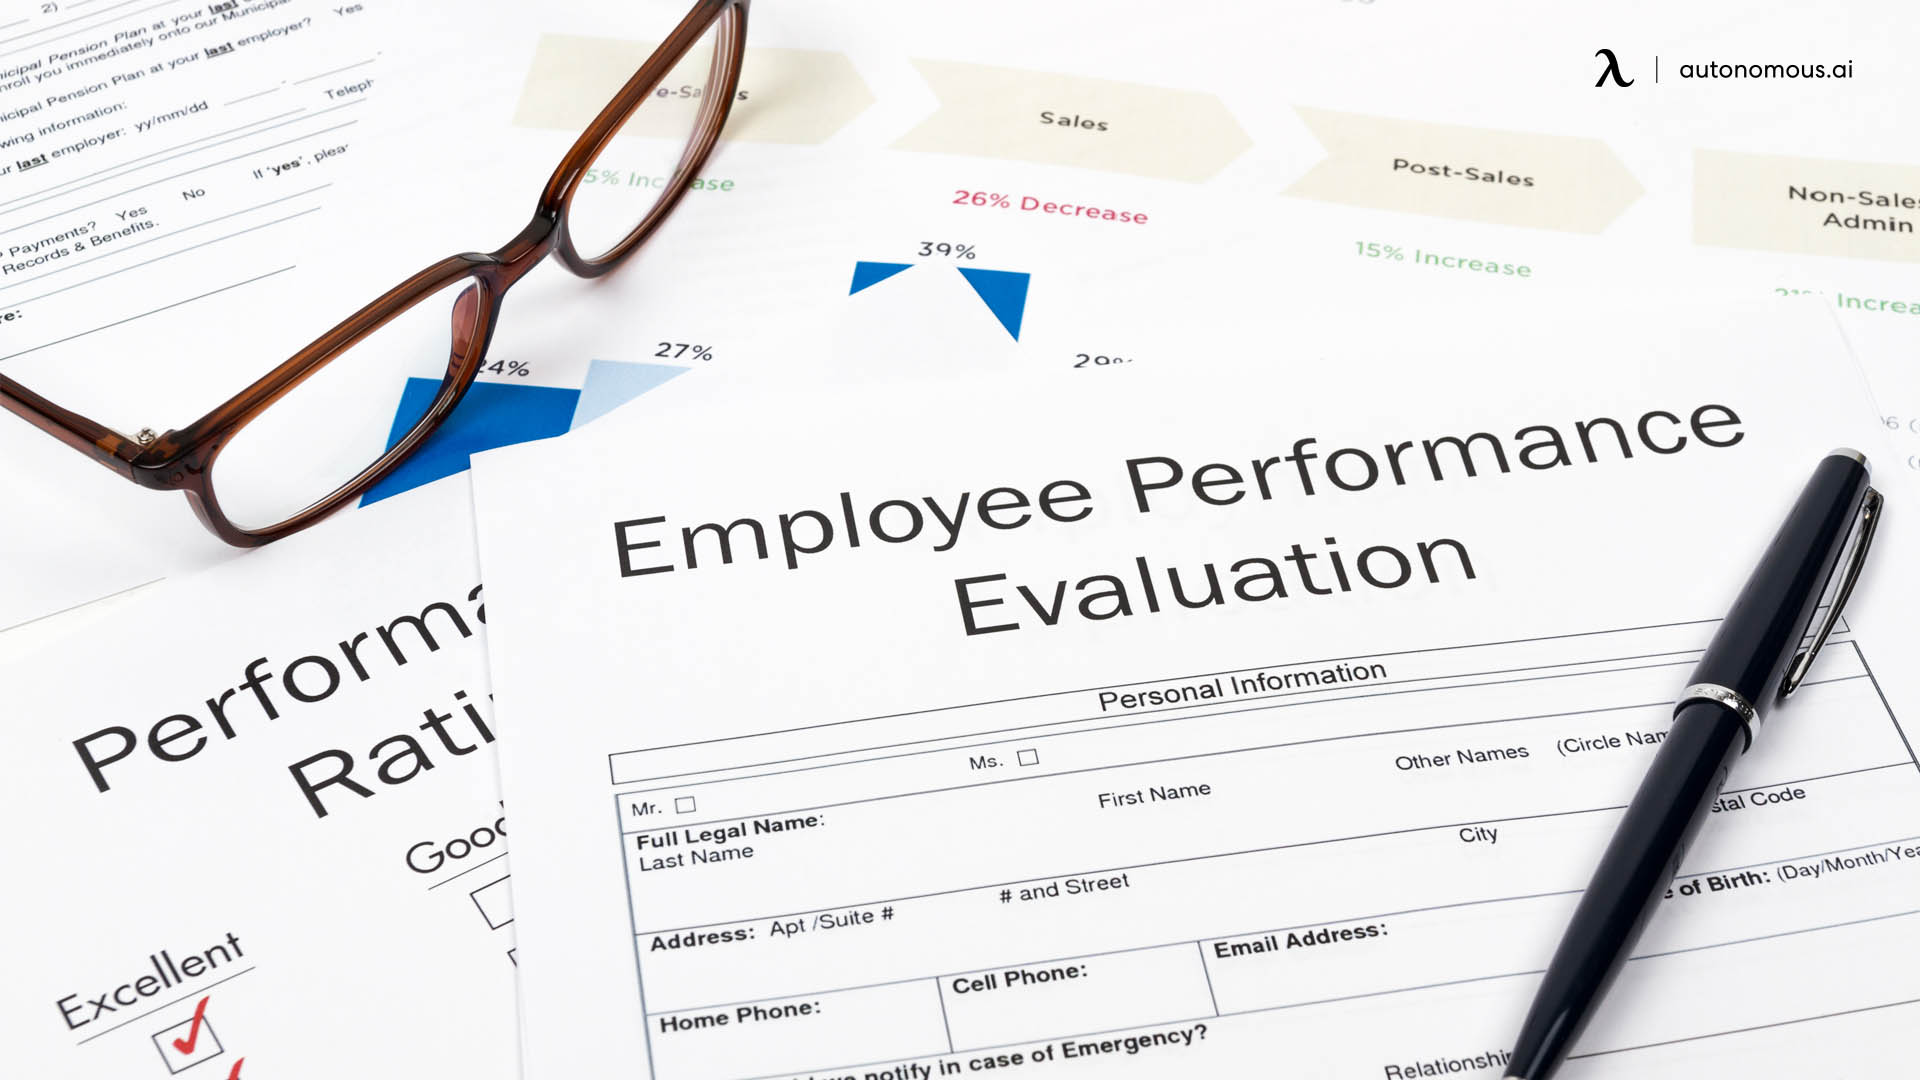 Employee Performance Evaluation - Everything You Should Know About It